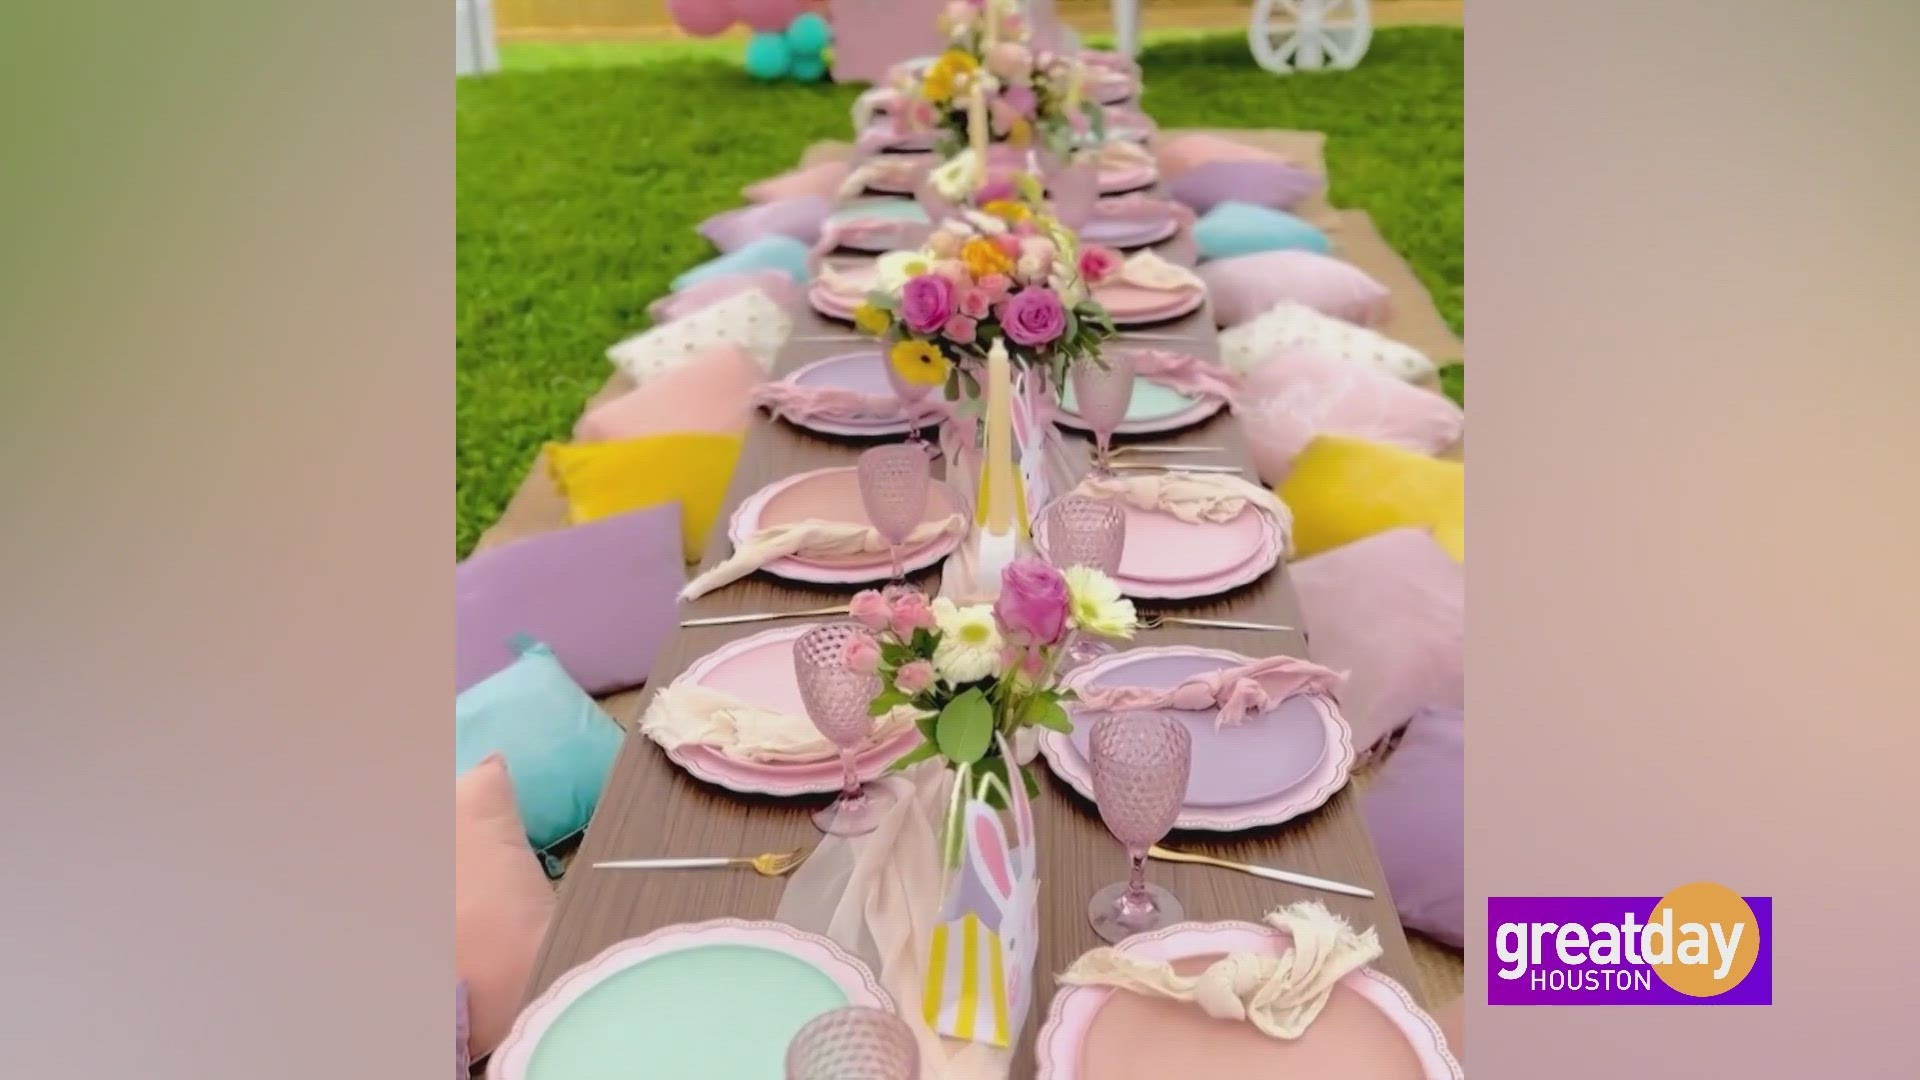 From proposals to safari themed picnics, Fancy Picnics can make your wildest dreams a reality!